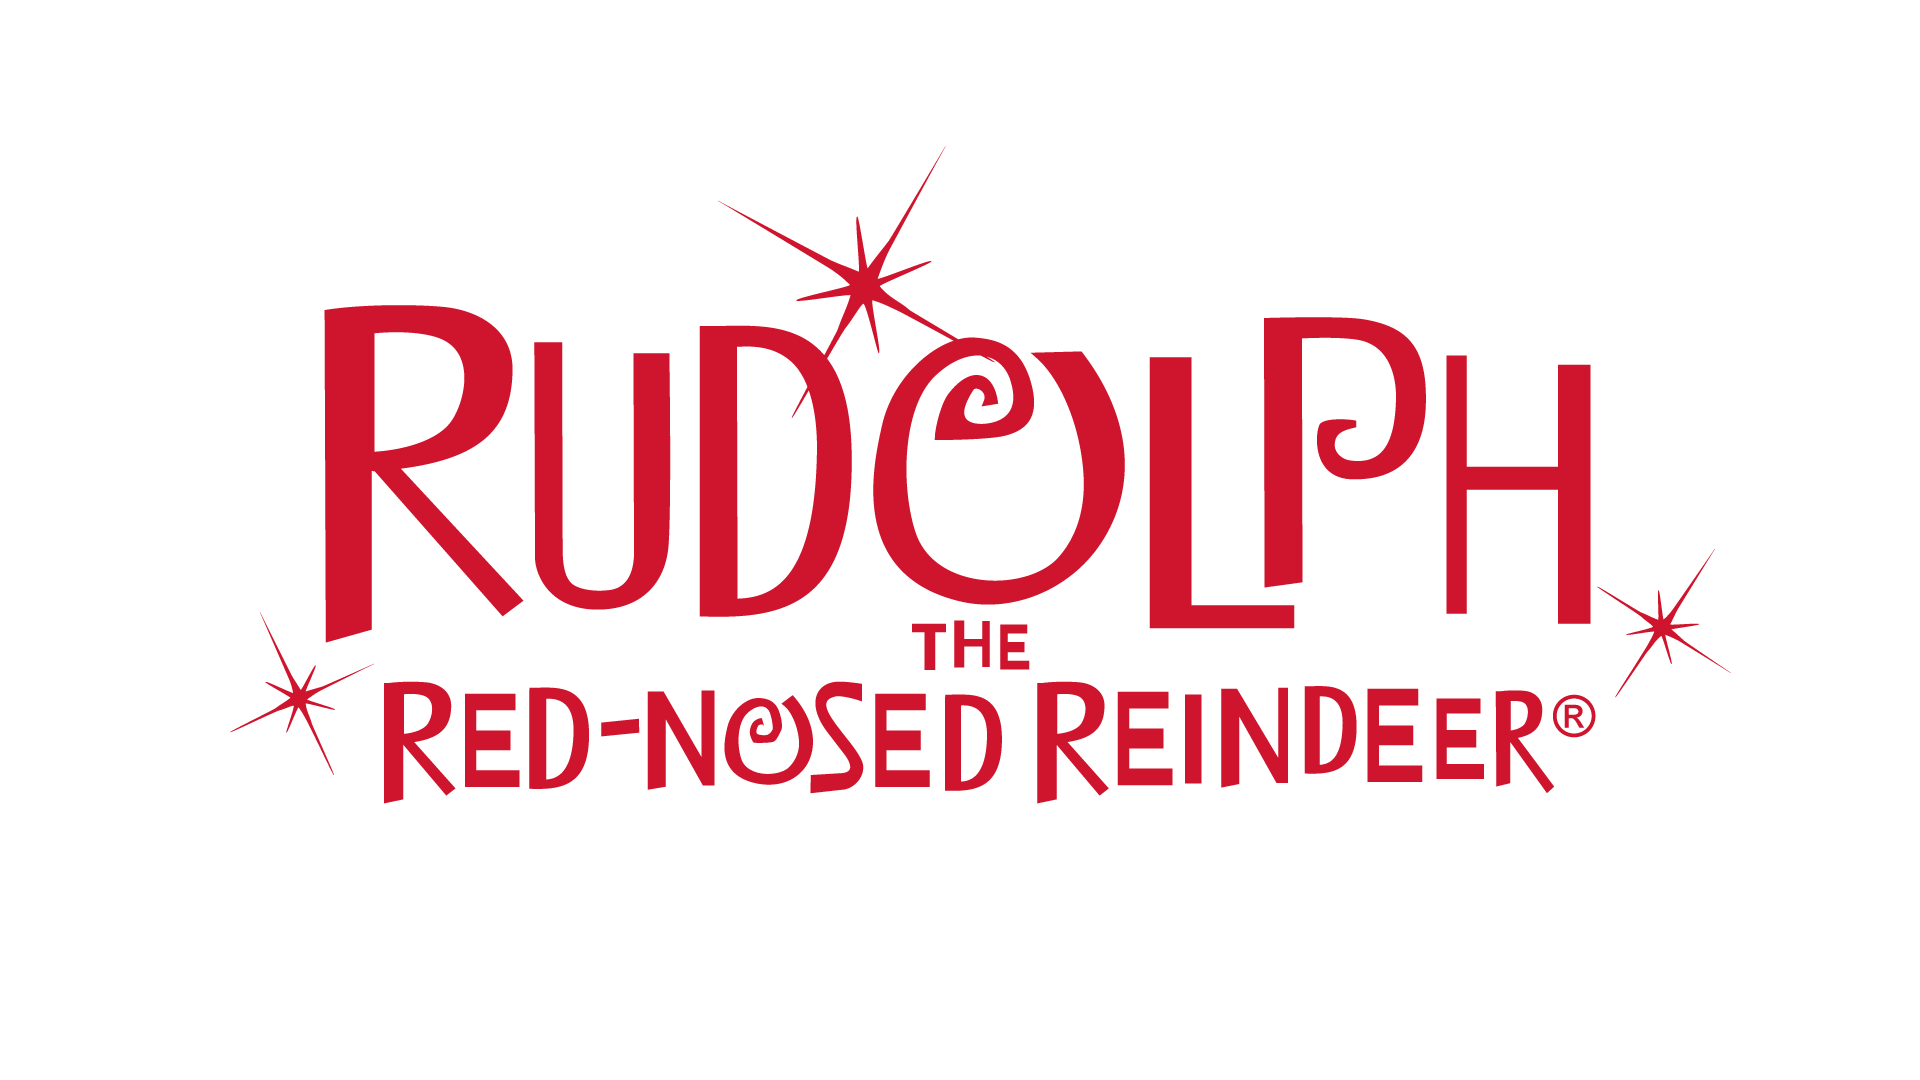 Rudolph the Red-Nosed Reindeer®